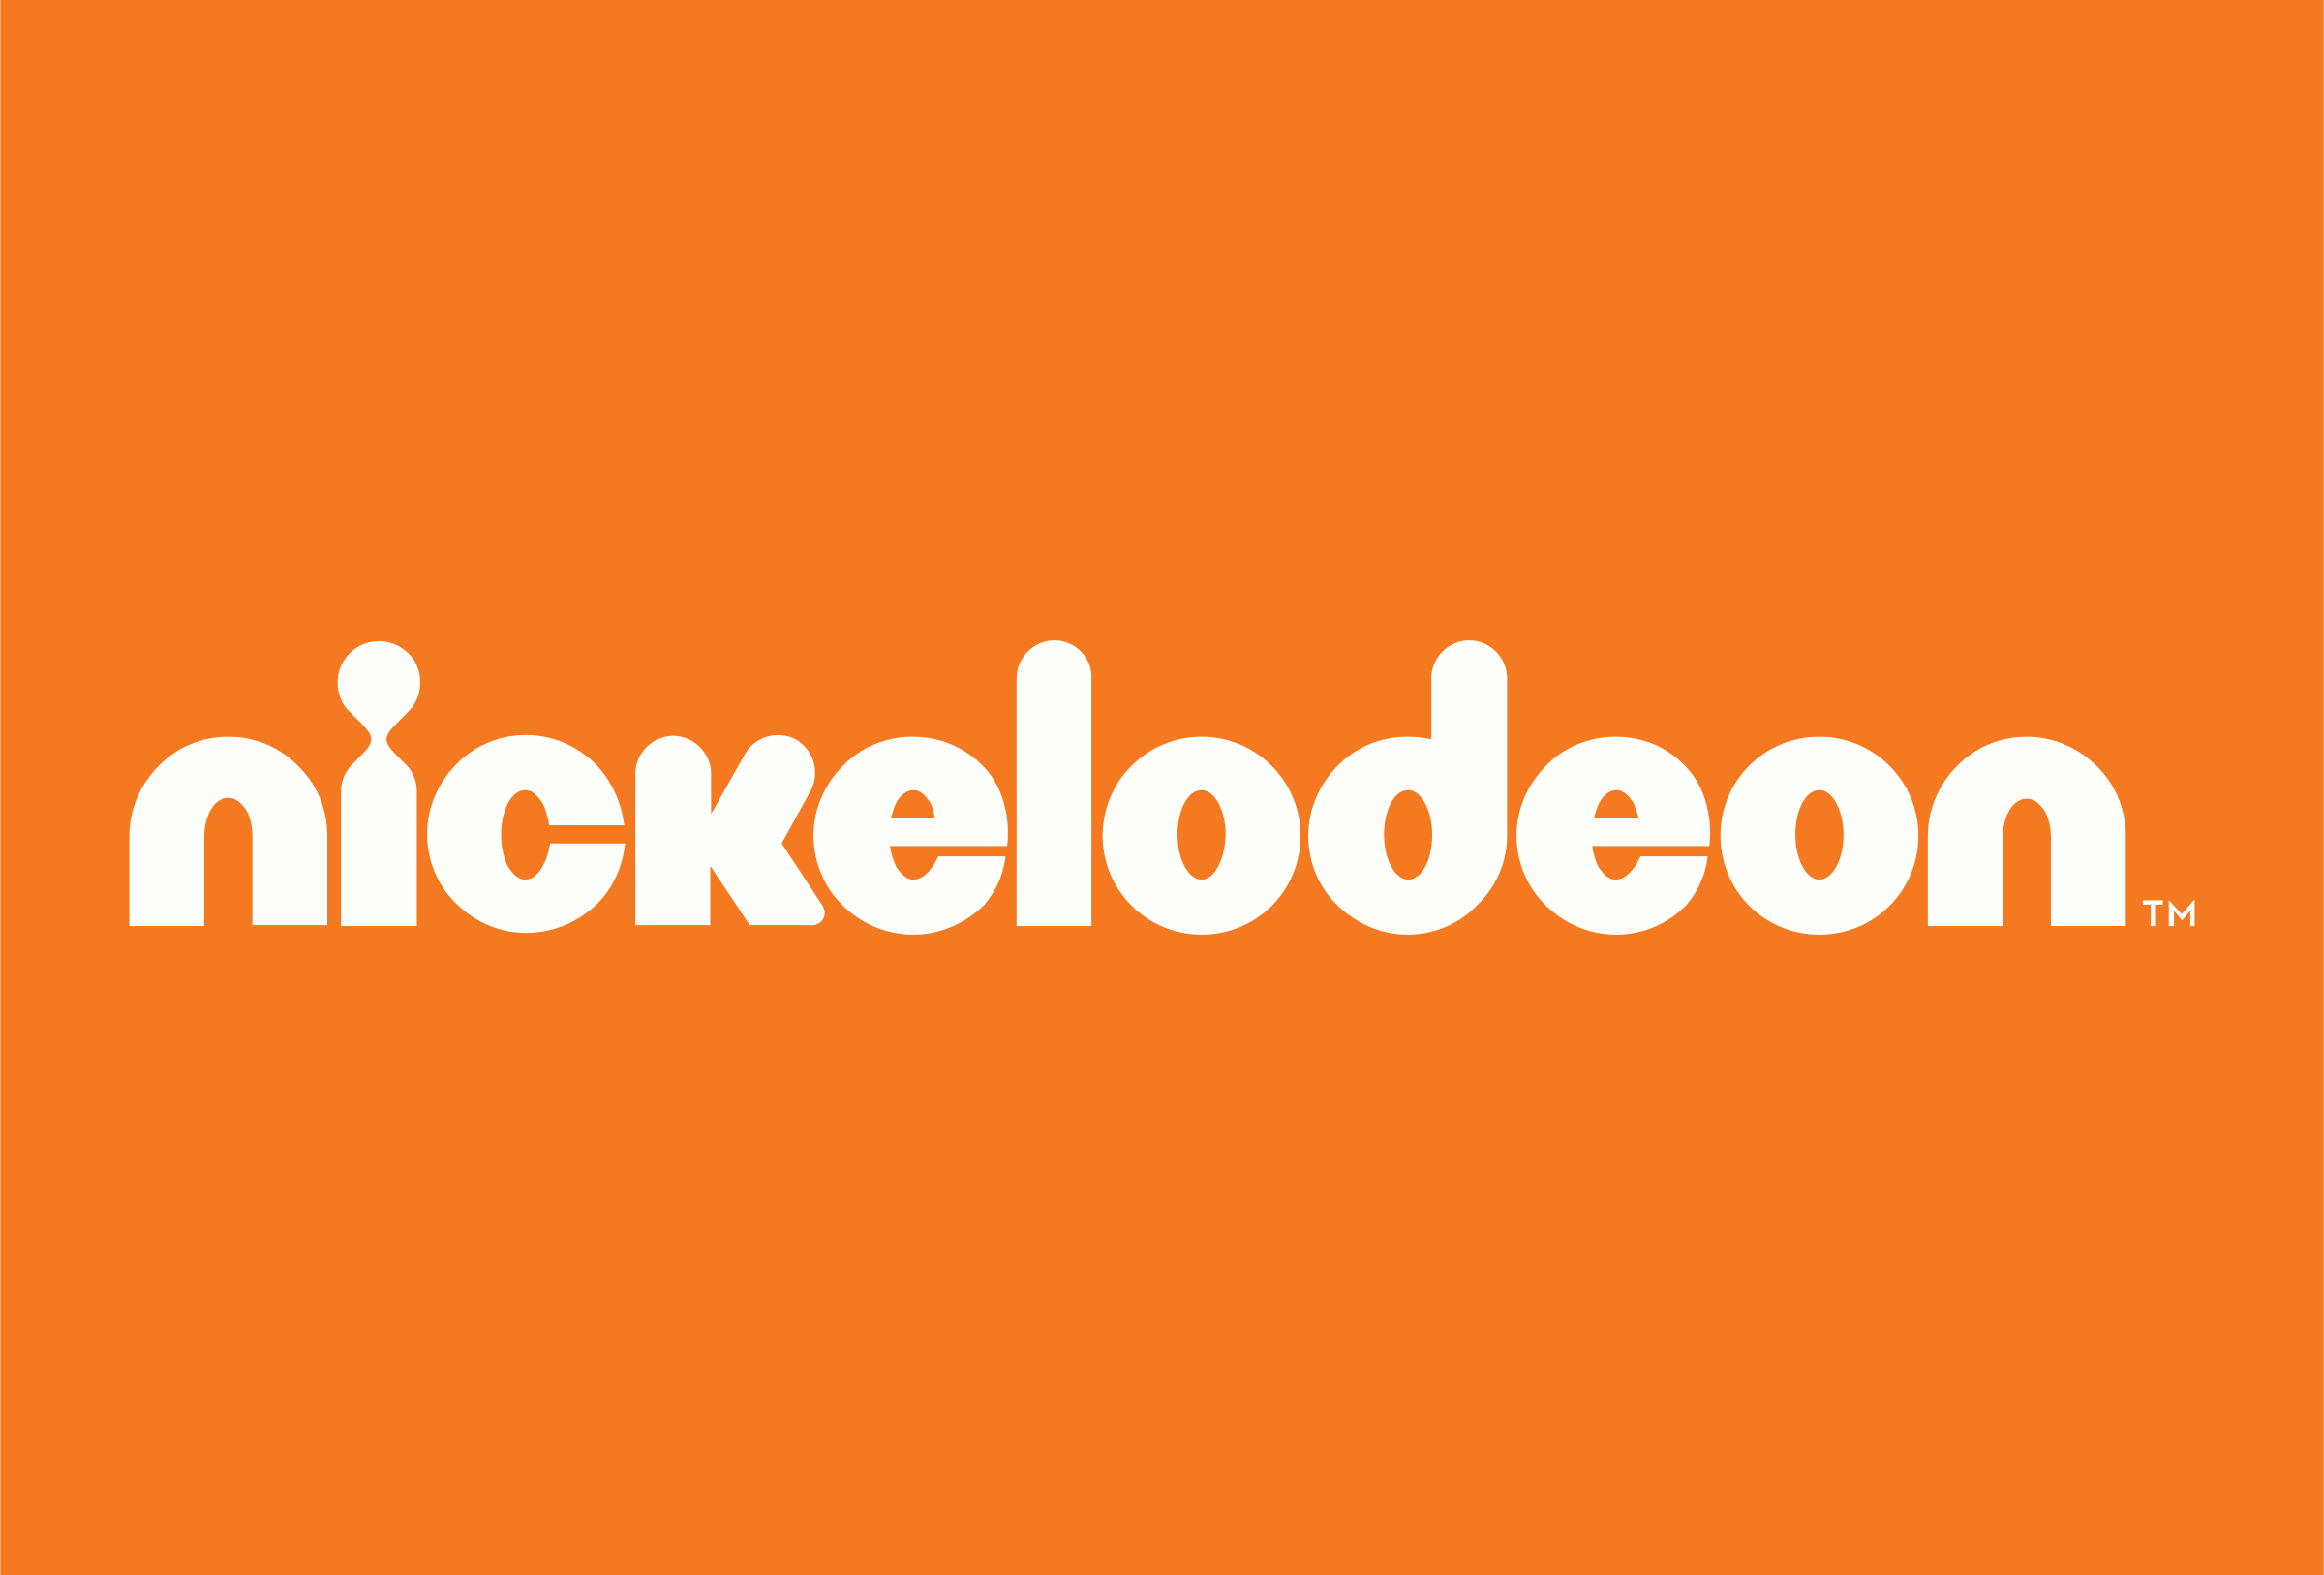 Who Owns Nickelodeon: Who Is The Real Owner Of Nickelodeon, Is It Nick Cannon?